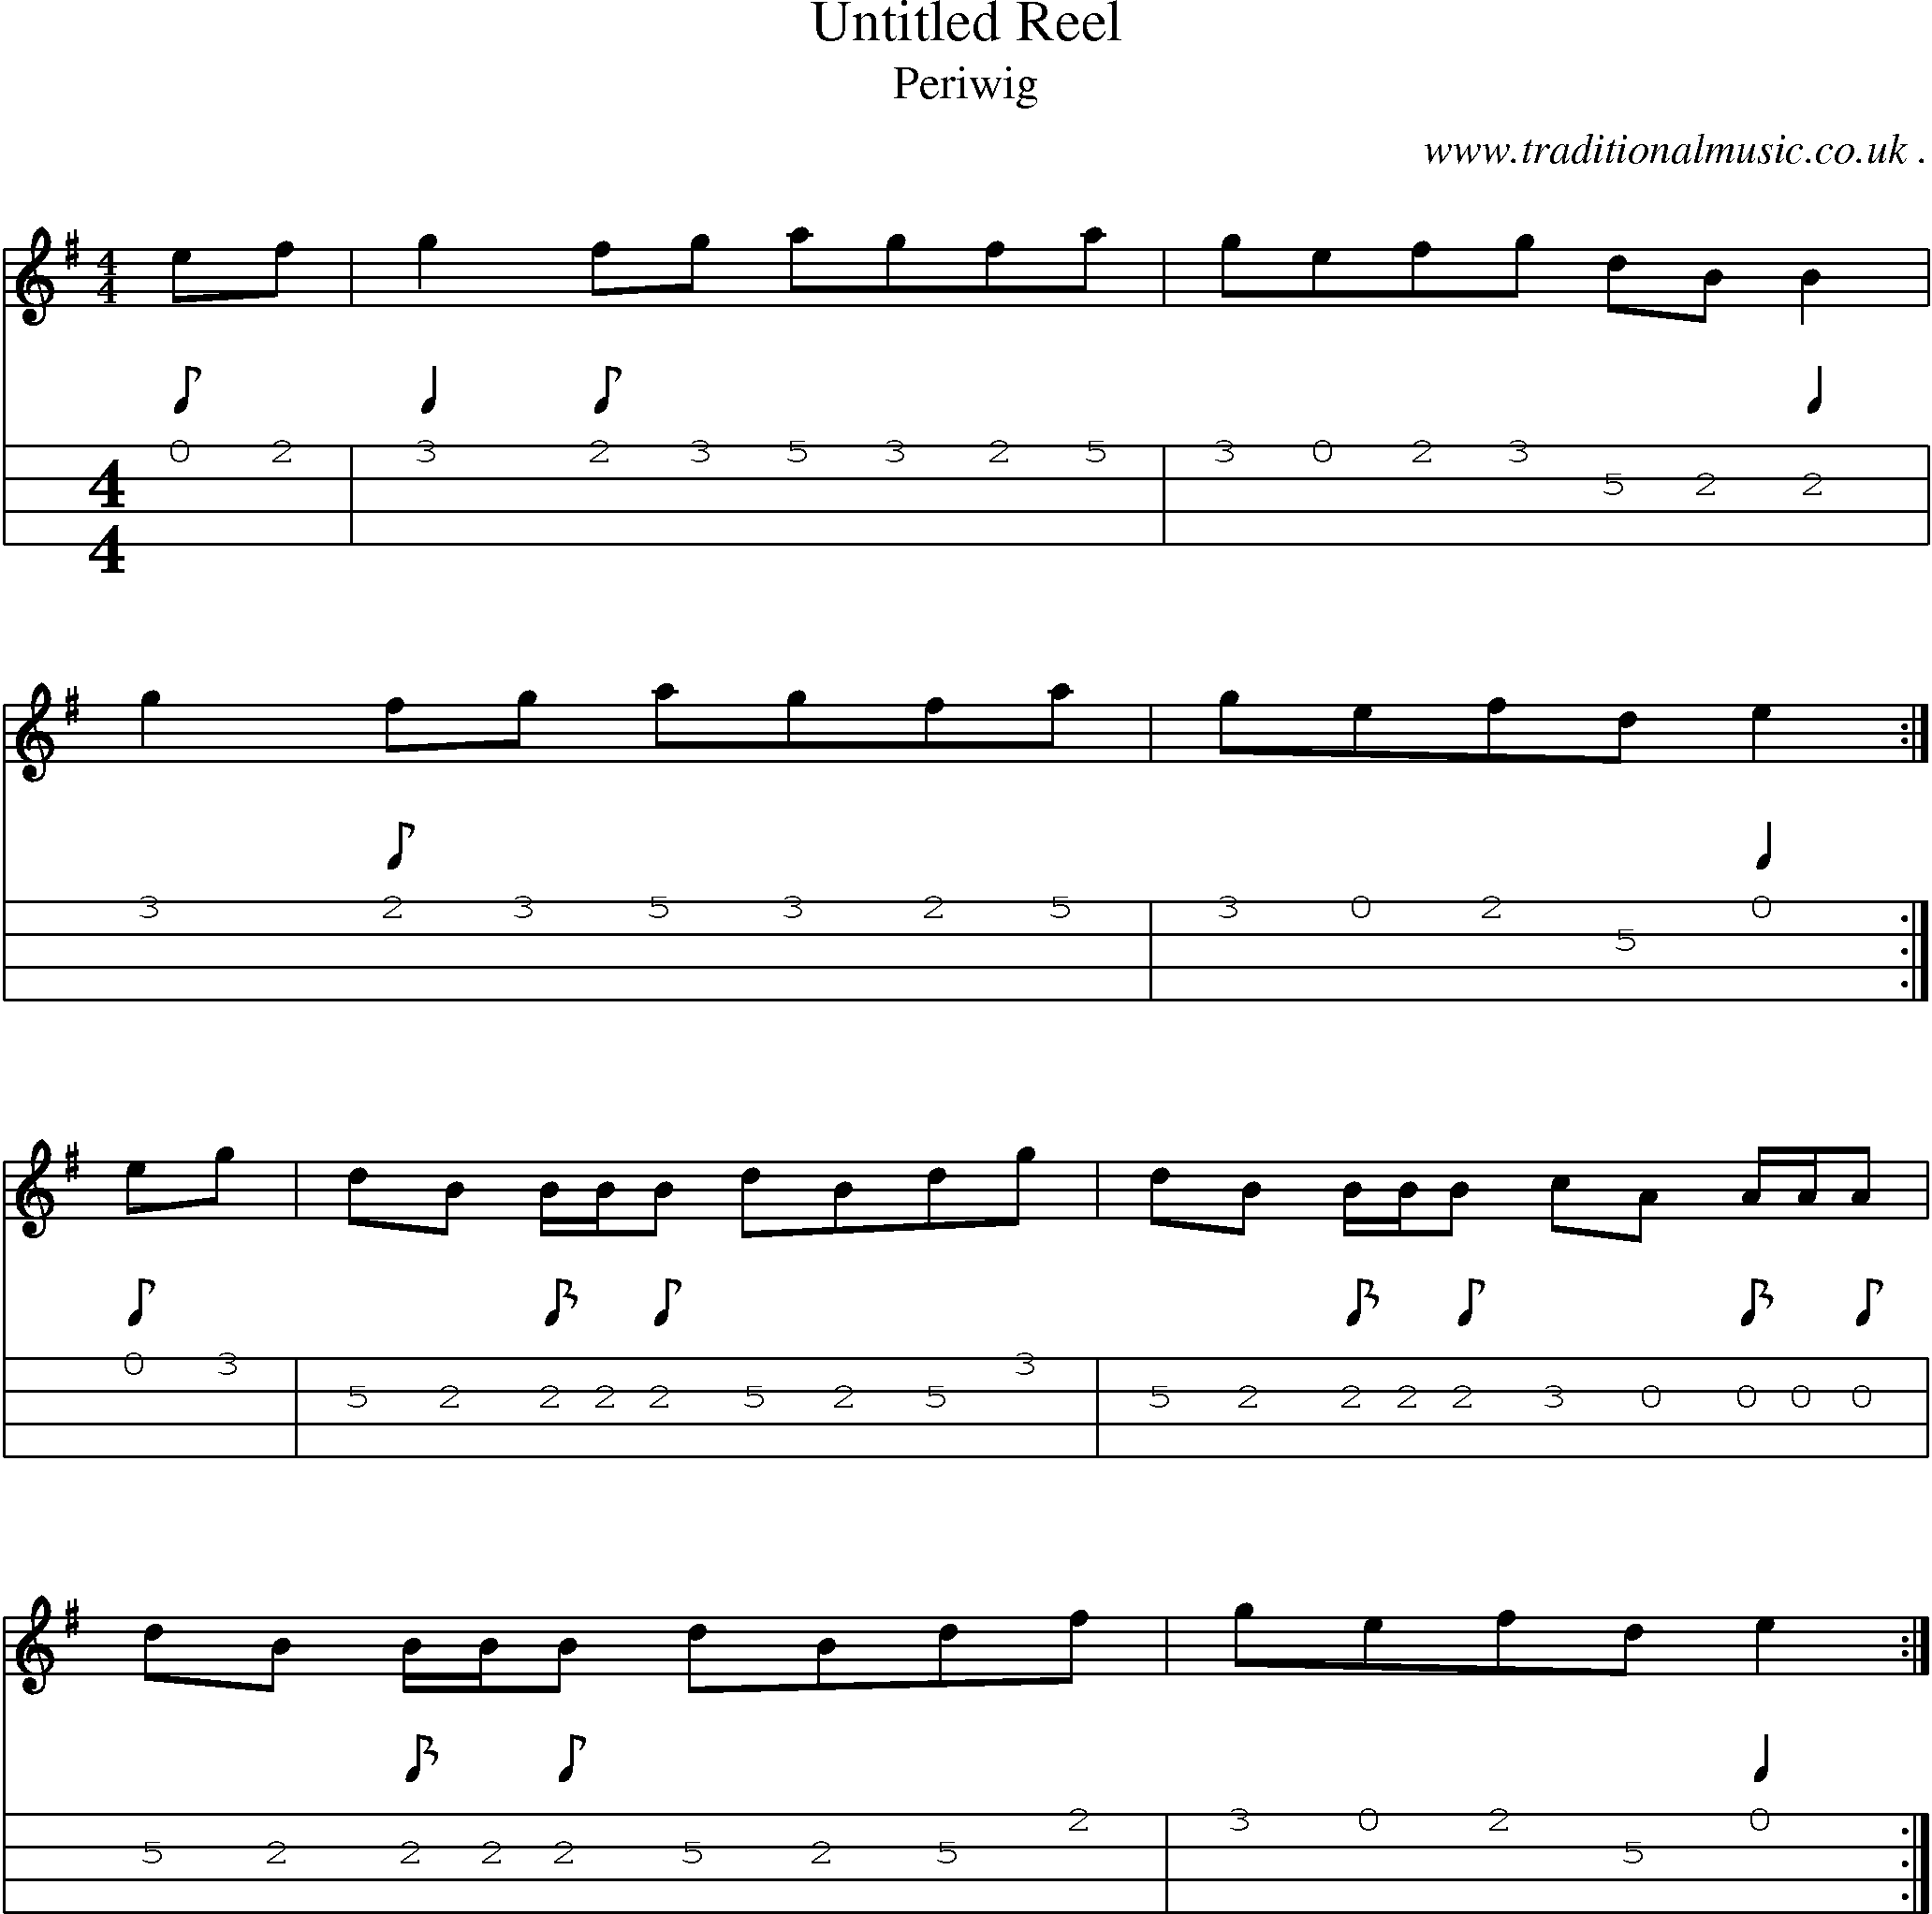 Sheet-music  score, Chords and Mandolin Tabs for Untitled Reel